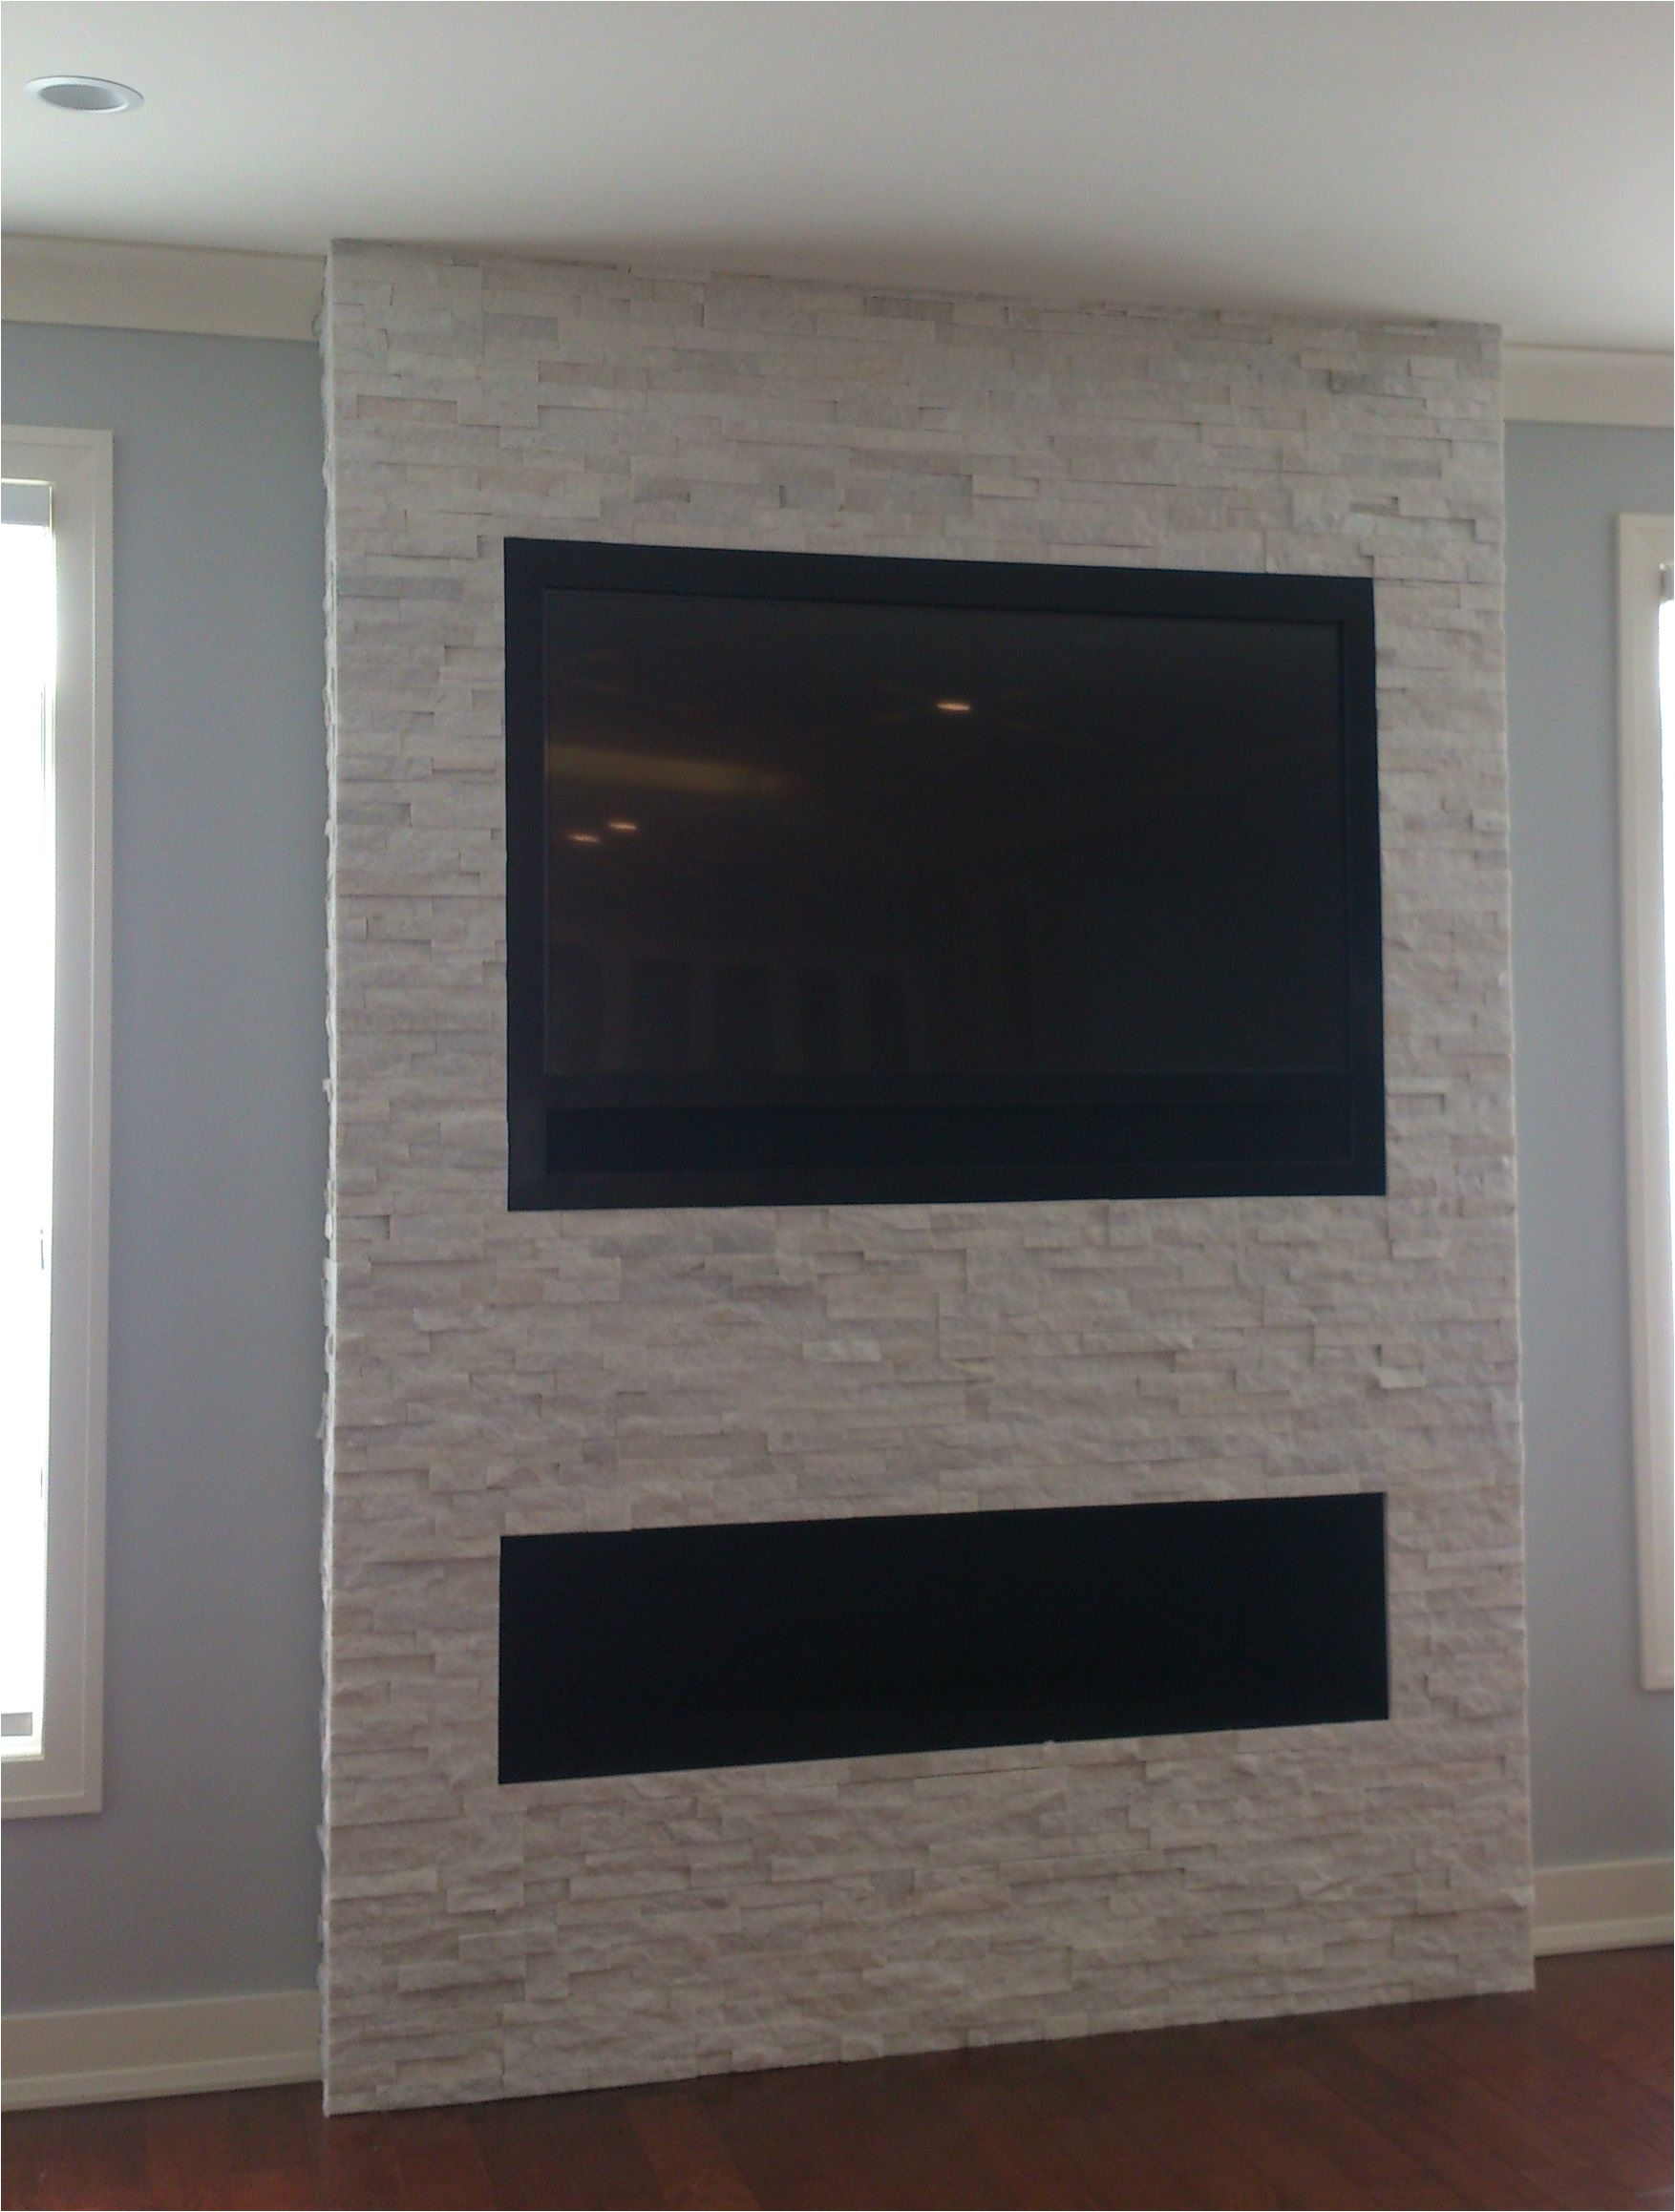 Fireplace Slab Stone Unique Gas Fireplace without Mantle Wondering How to Mount A Tv